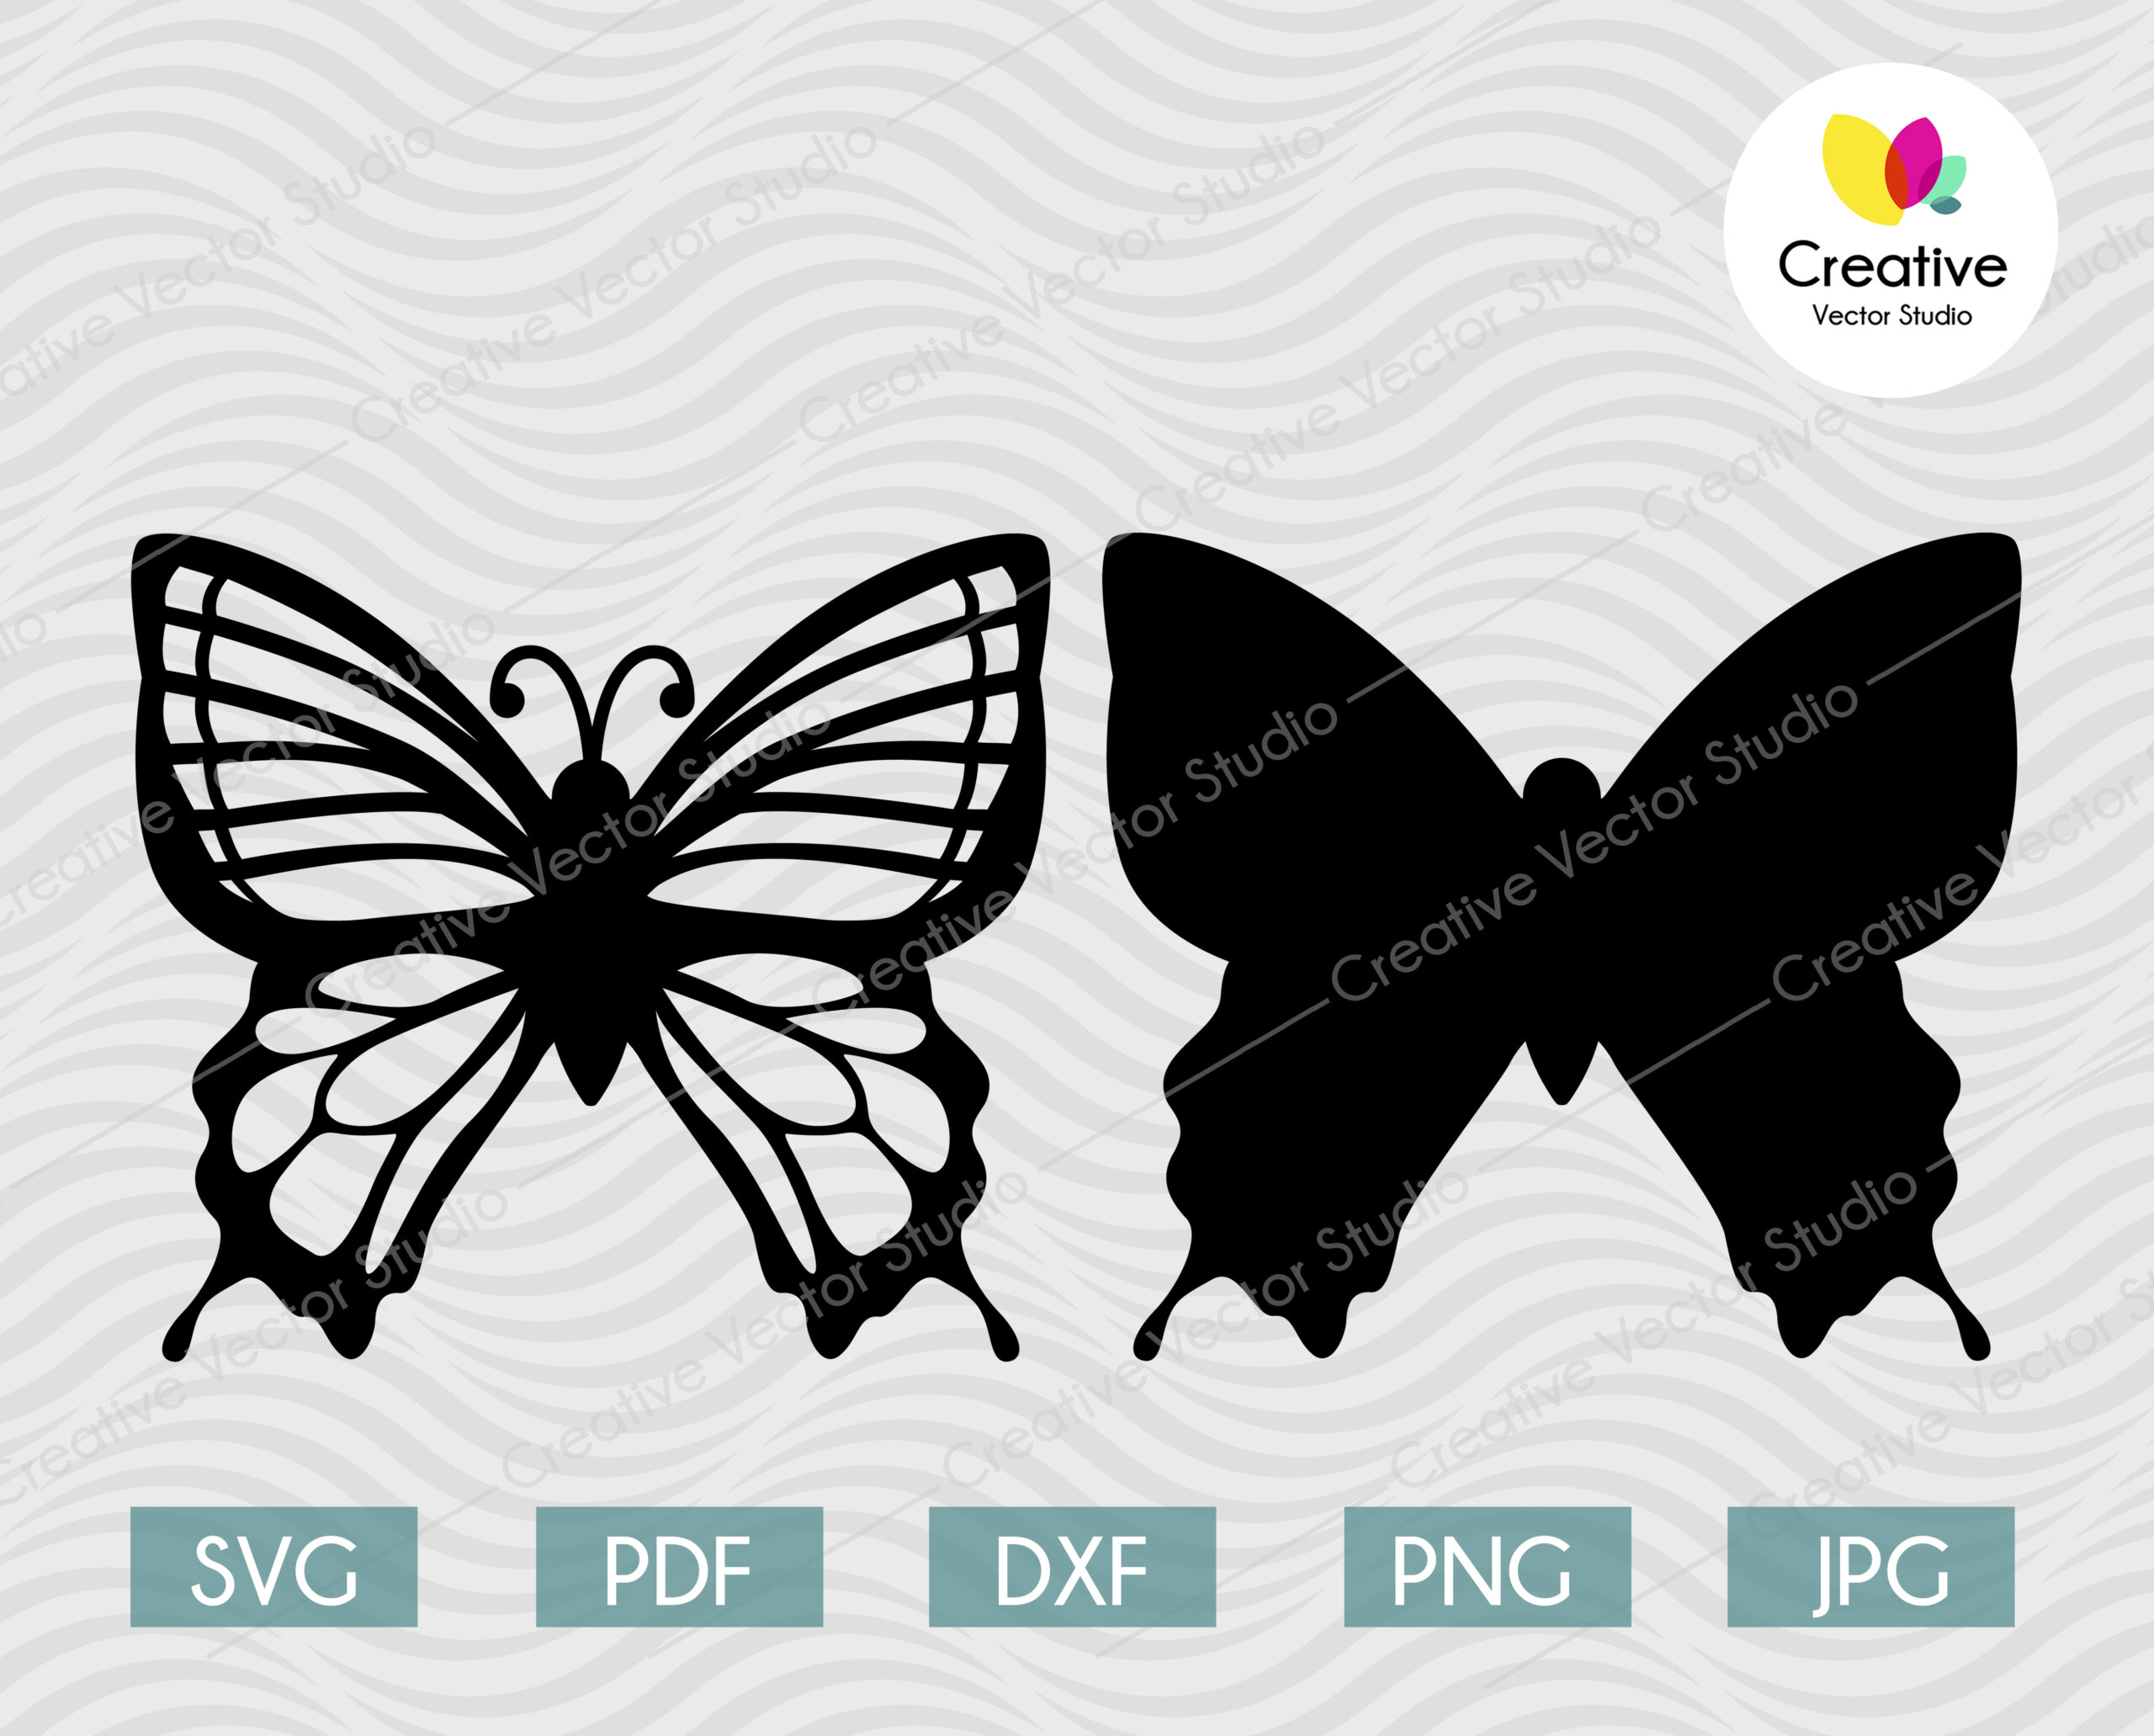 https://creative-vector-studio.com/wp-content/uploads/2020/10/Paper-Butterfly-svg_3079-scaled.jpg